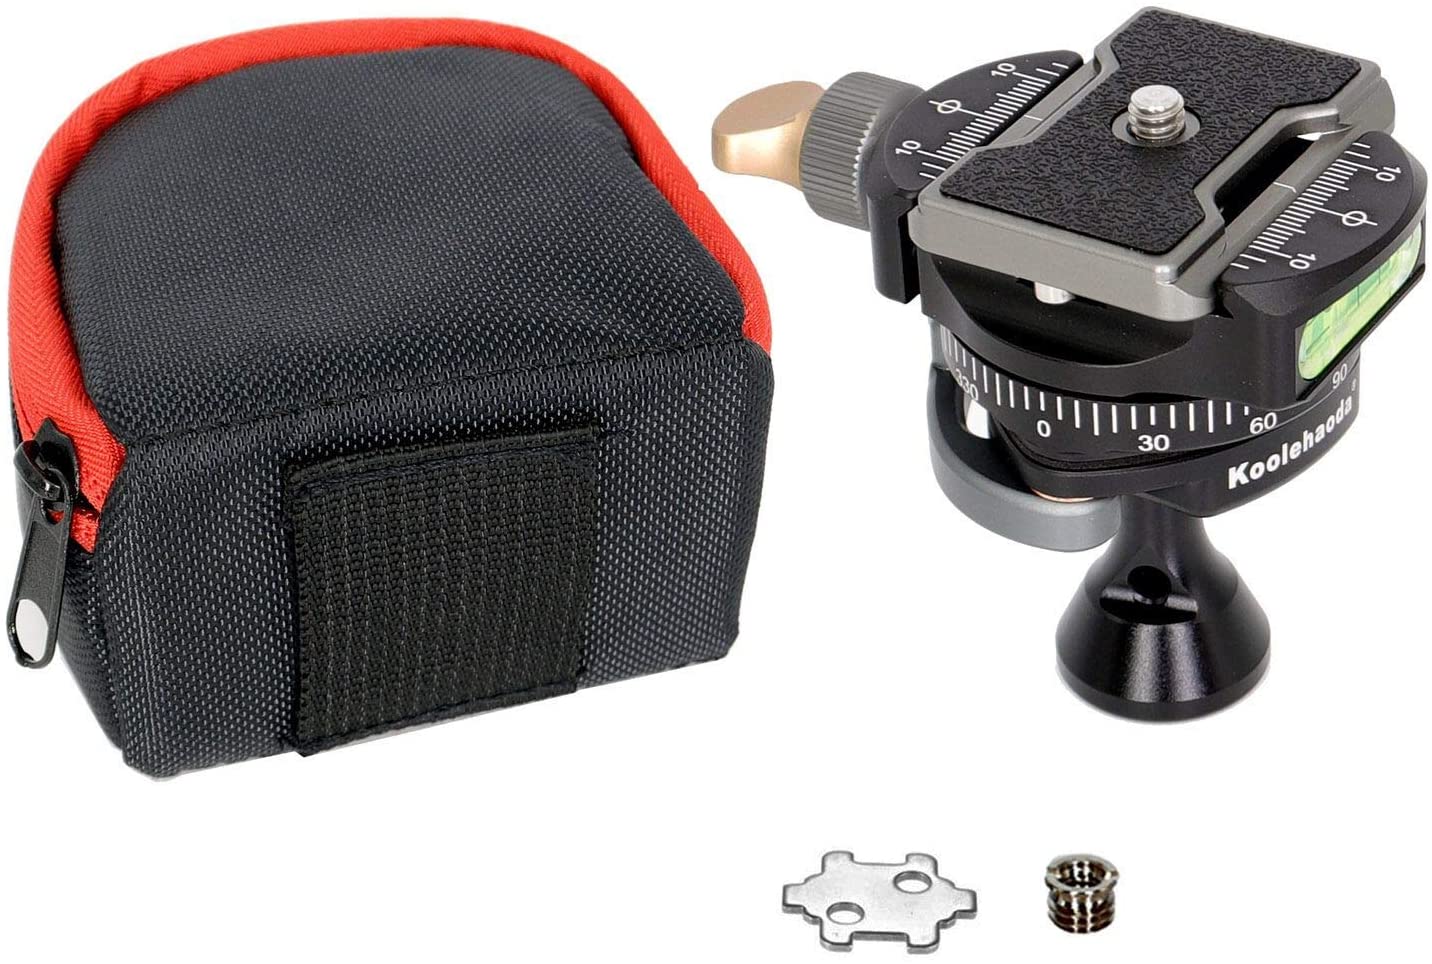 Multifunction 360° Panoramic Ballhead,Tripod Ballhead with 1/4" Quick Release Plate and Bubble Level,Weights Only 190g/6.7oz, for Tripod,Monopod,Slider and DSLR Cameras